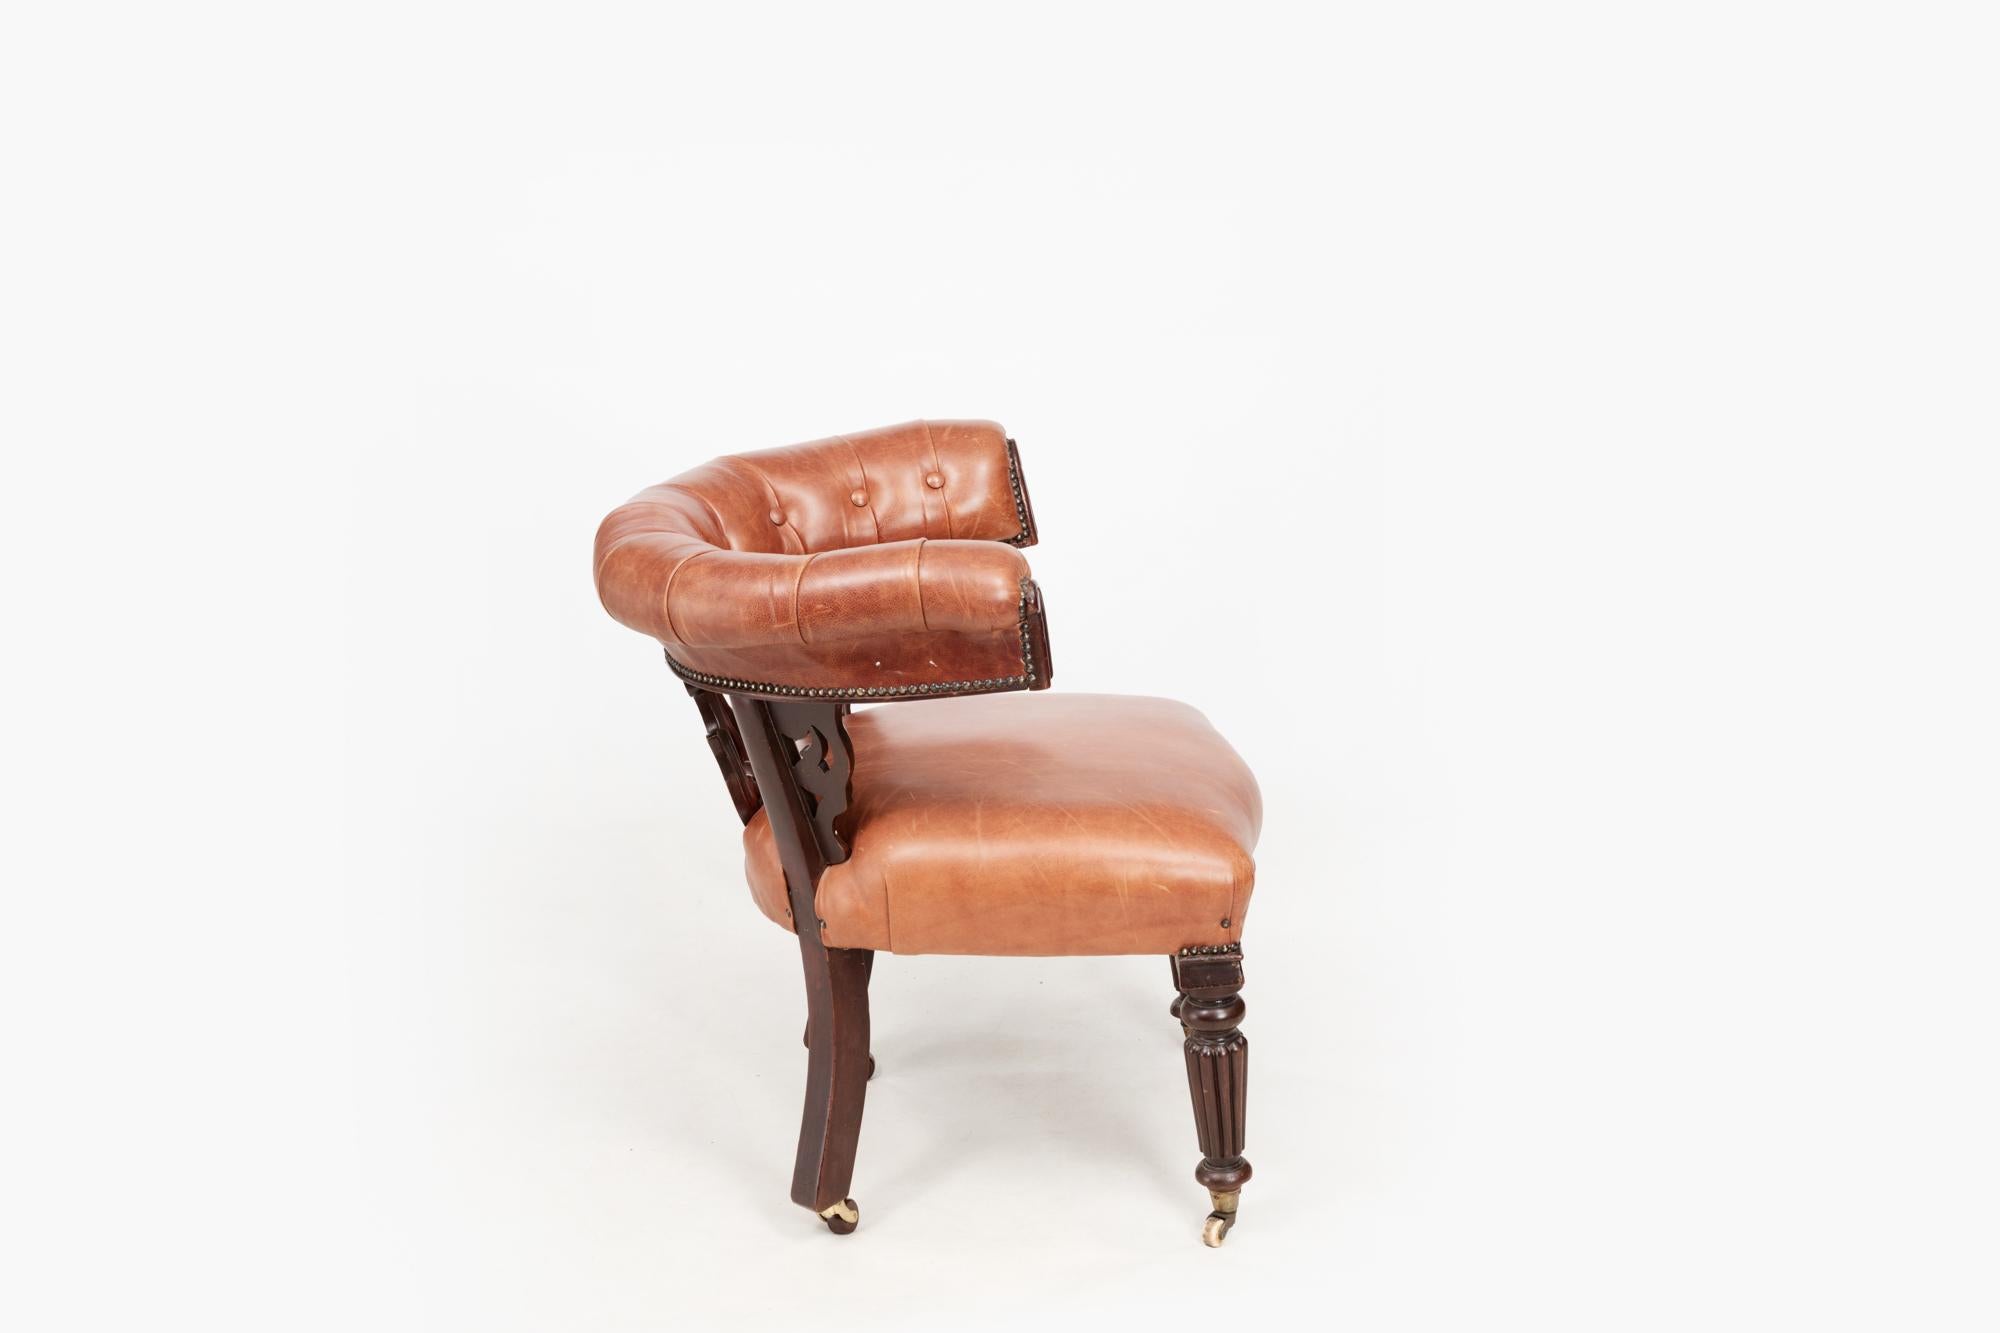 19th Century William IV mahogany Windsor chair. This bow back desk chair has been recovered with a tan leather button upholstered crest rail and seat. The carved splat features C-Scroll detailing, and the piece sits on turned and gadroon moulded